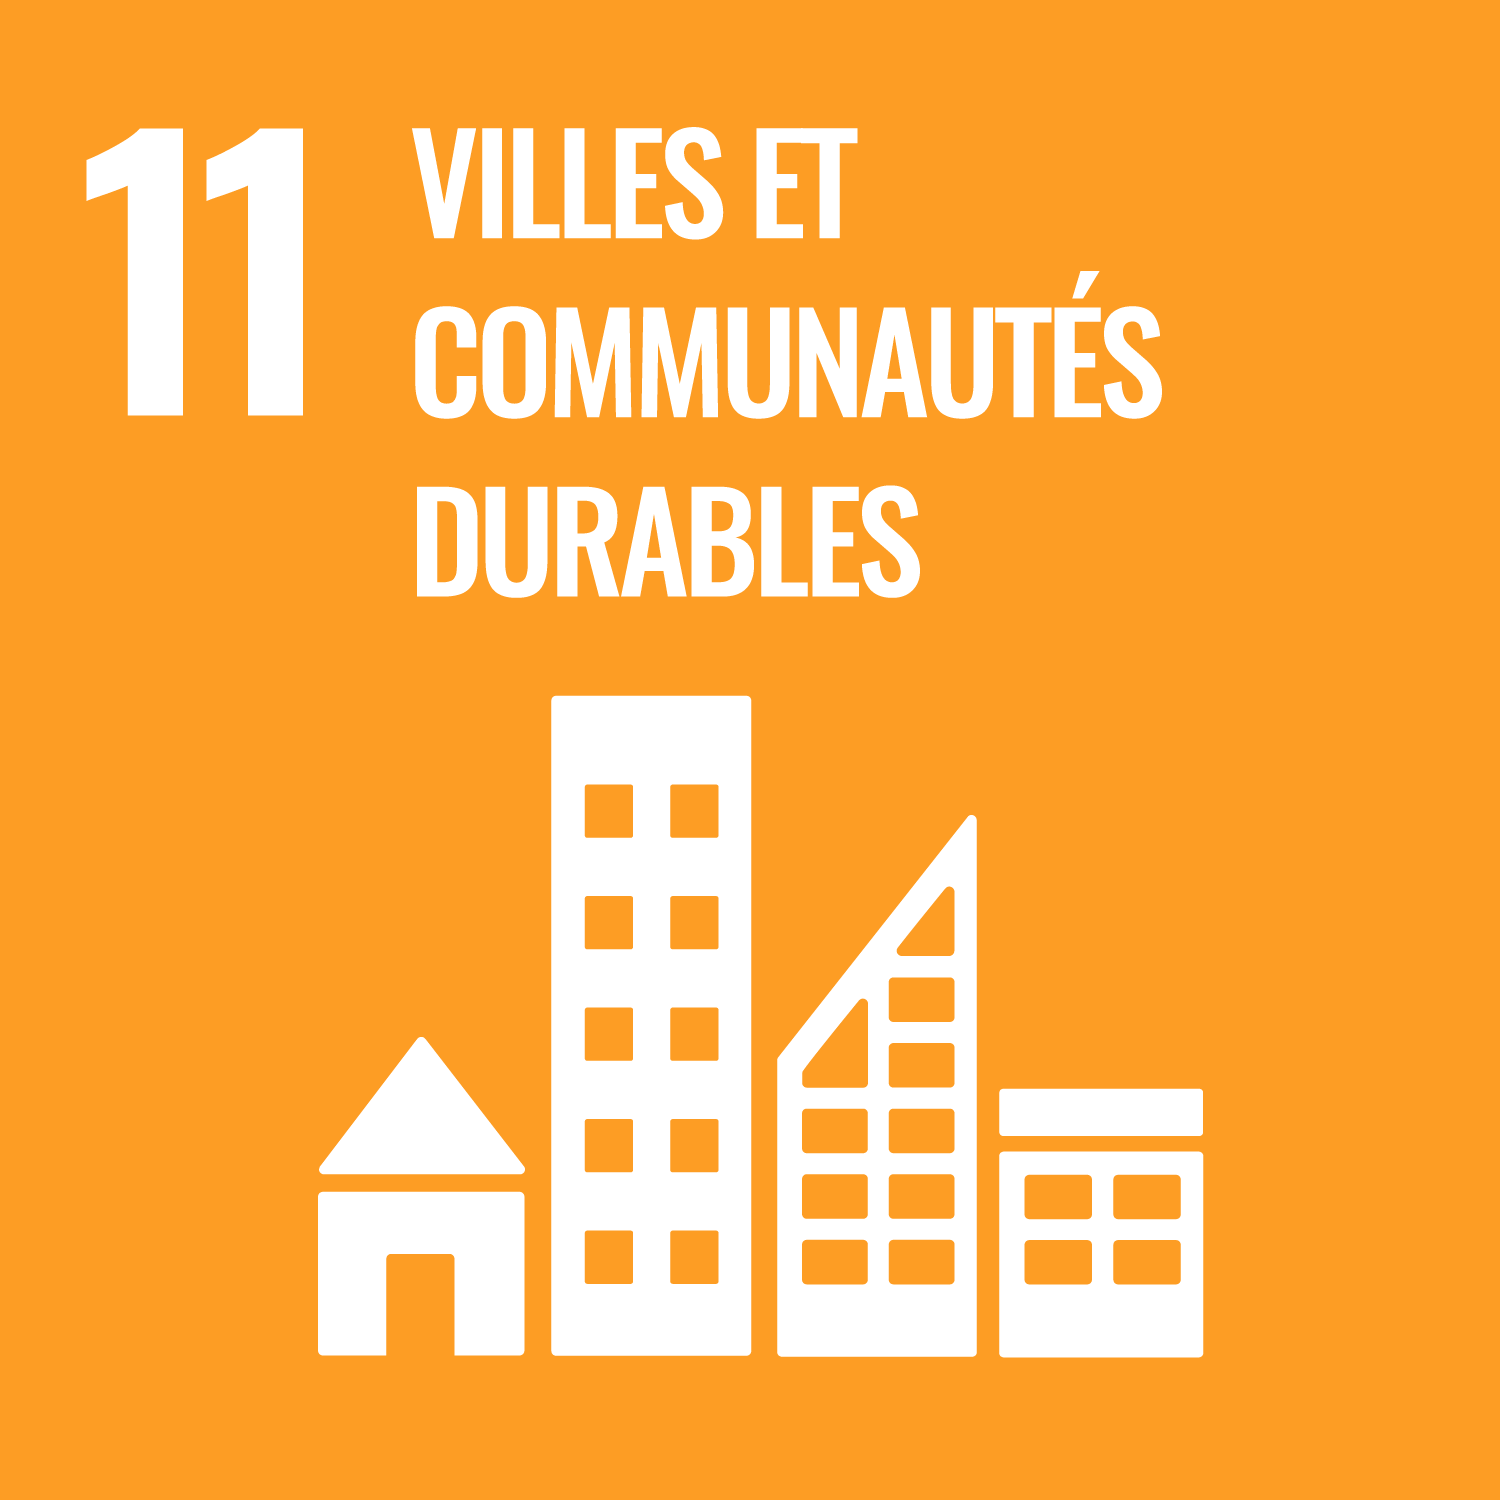 UN Compact Goal 11 Icon "Sustainable Cities and Communities"